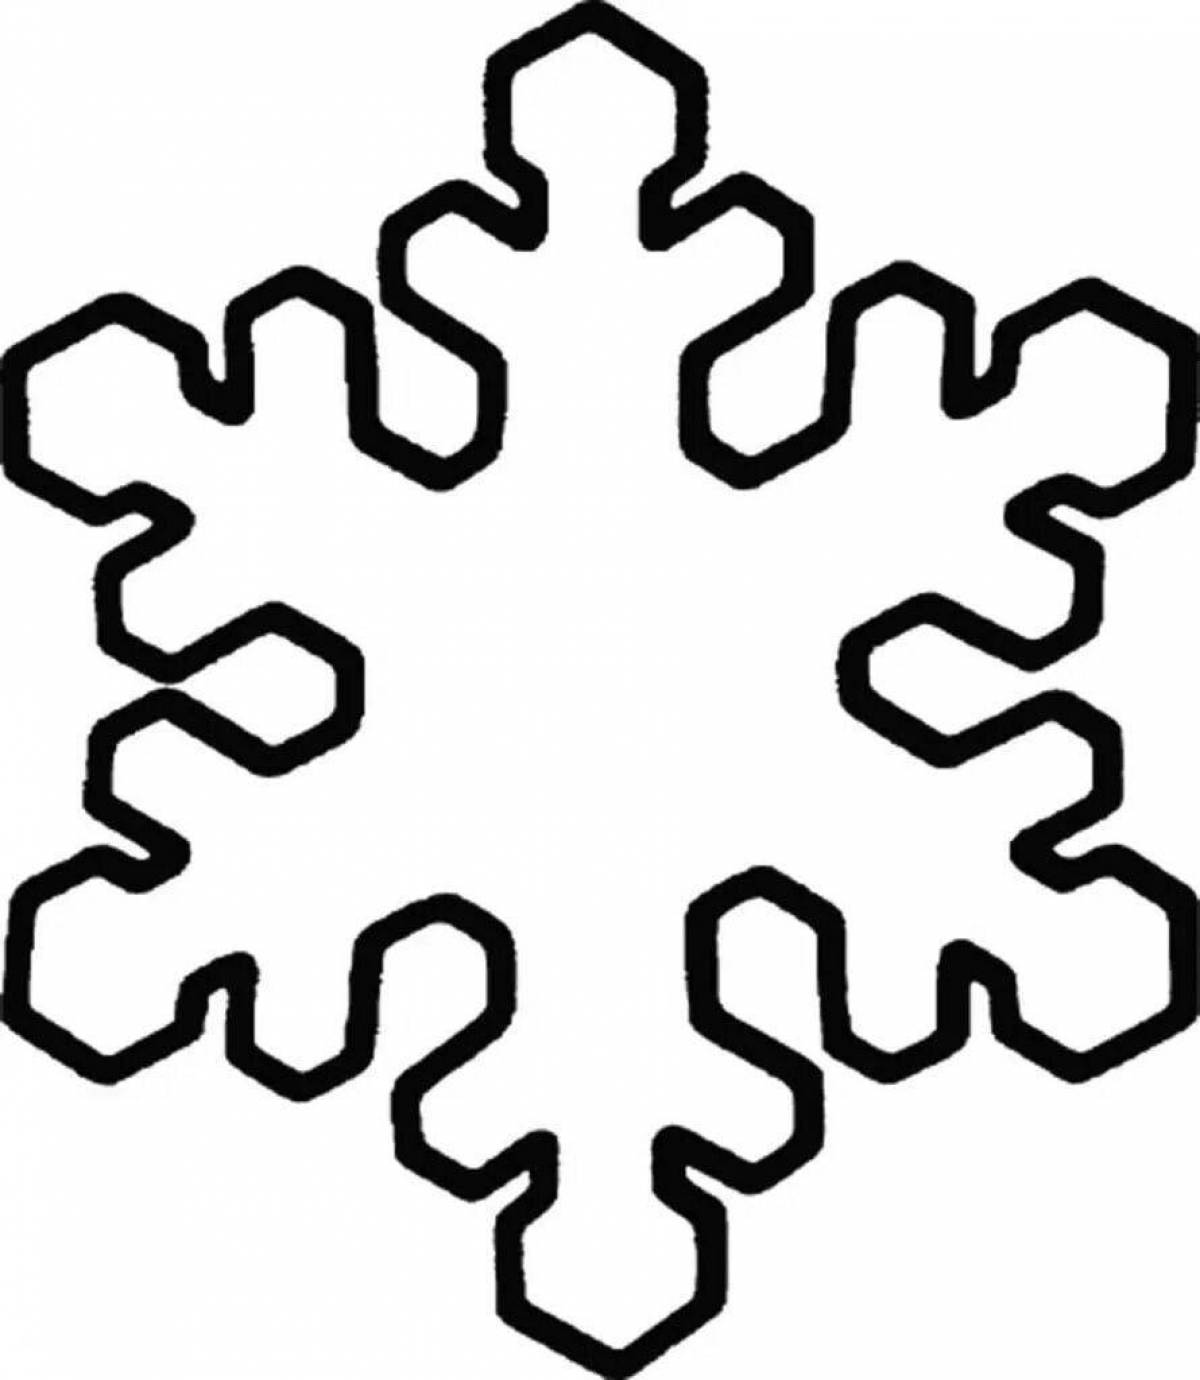 Glowing snowflake coloring pages for children 4-5 years old in kindergarten